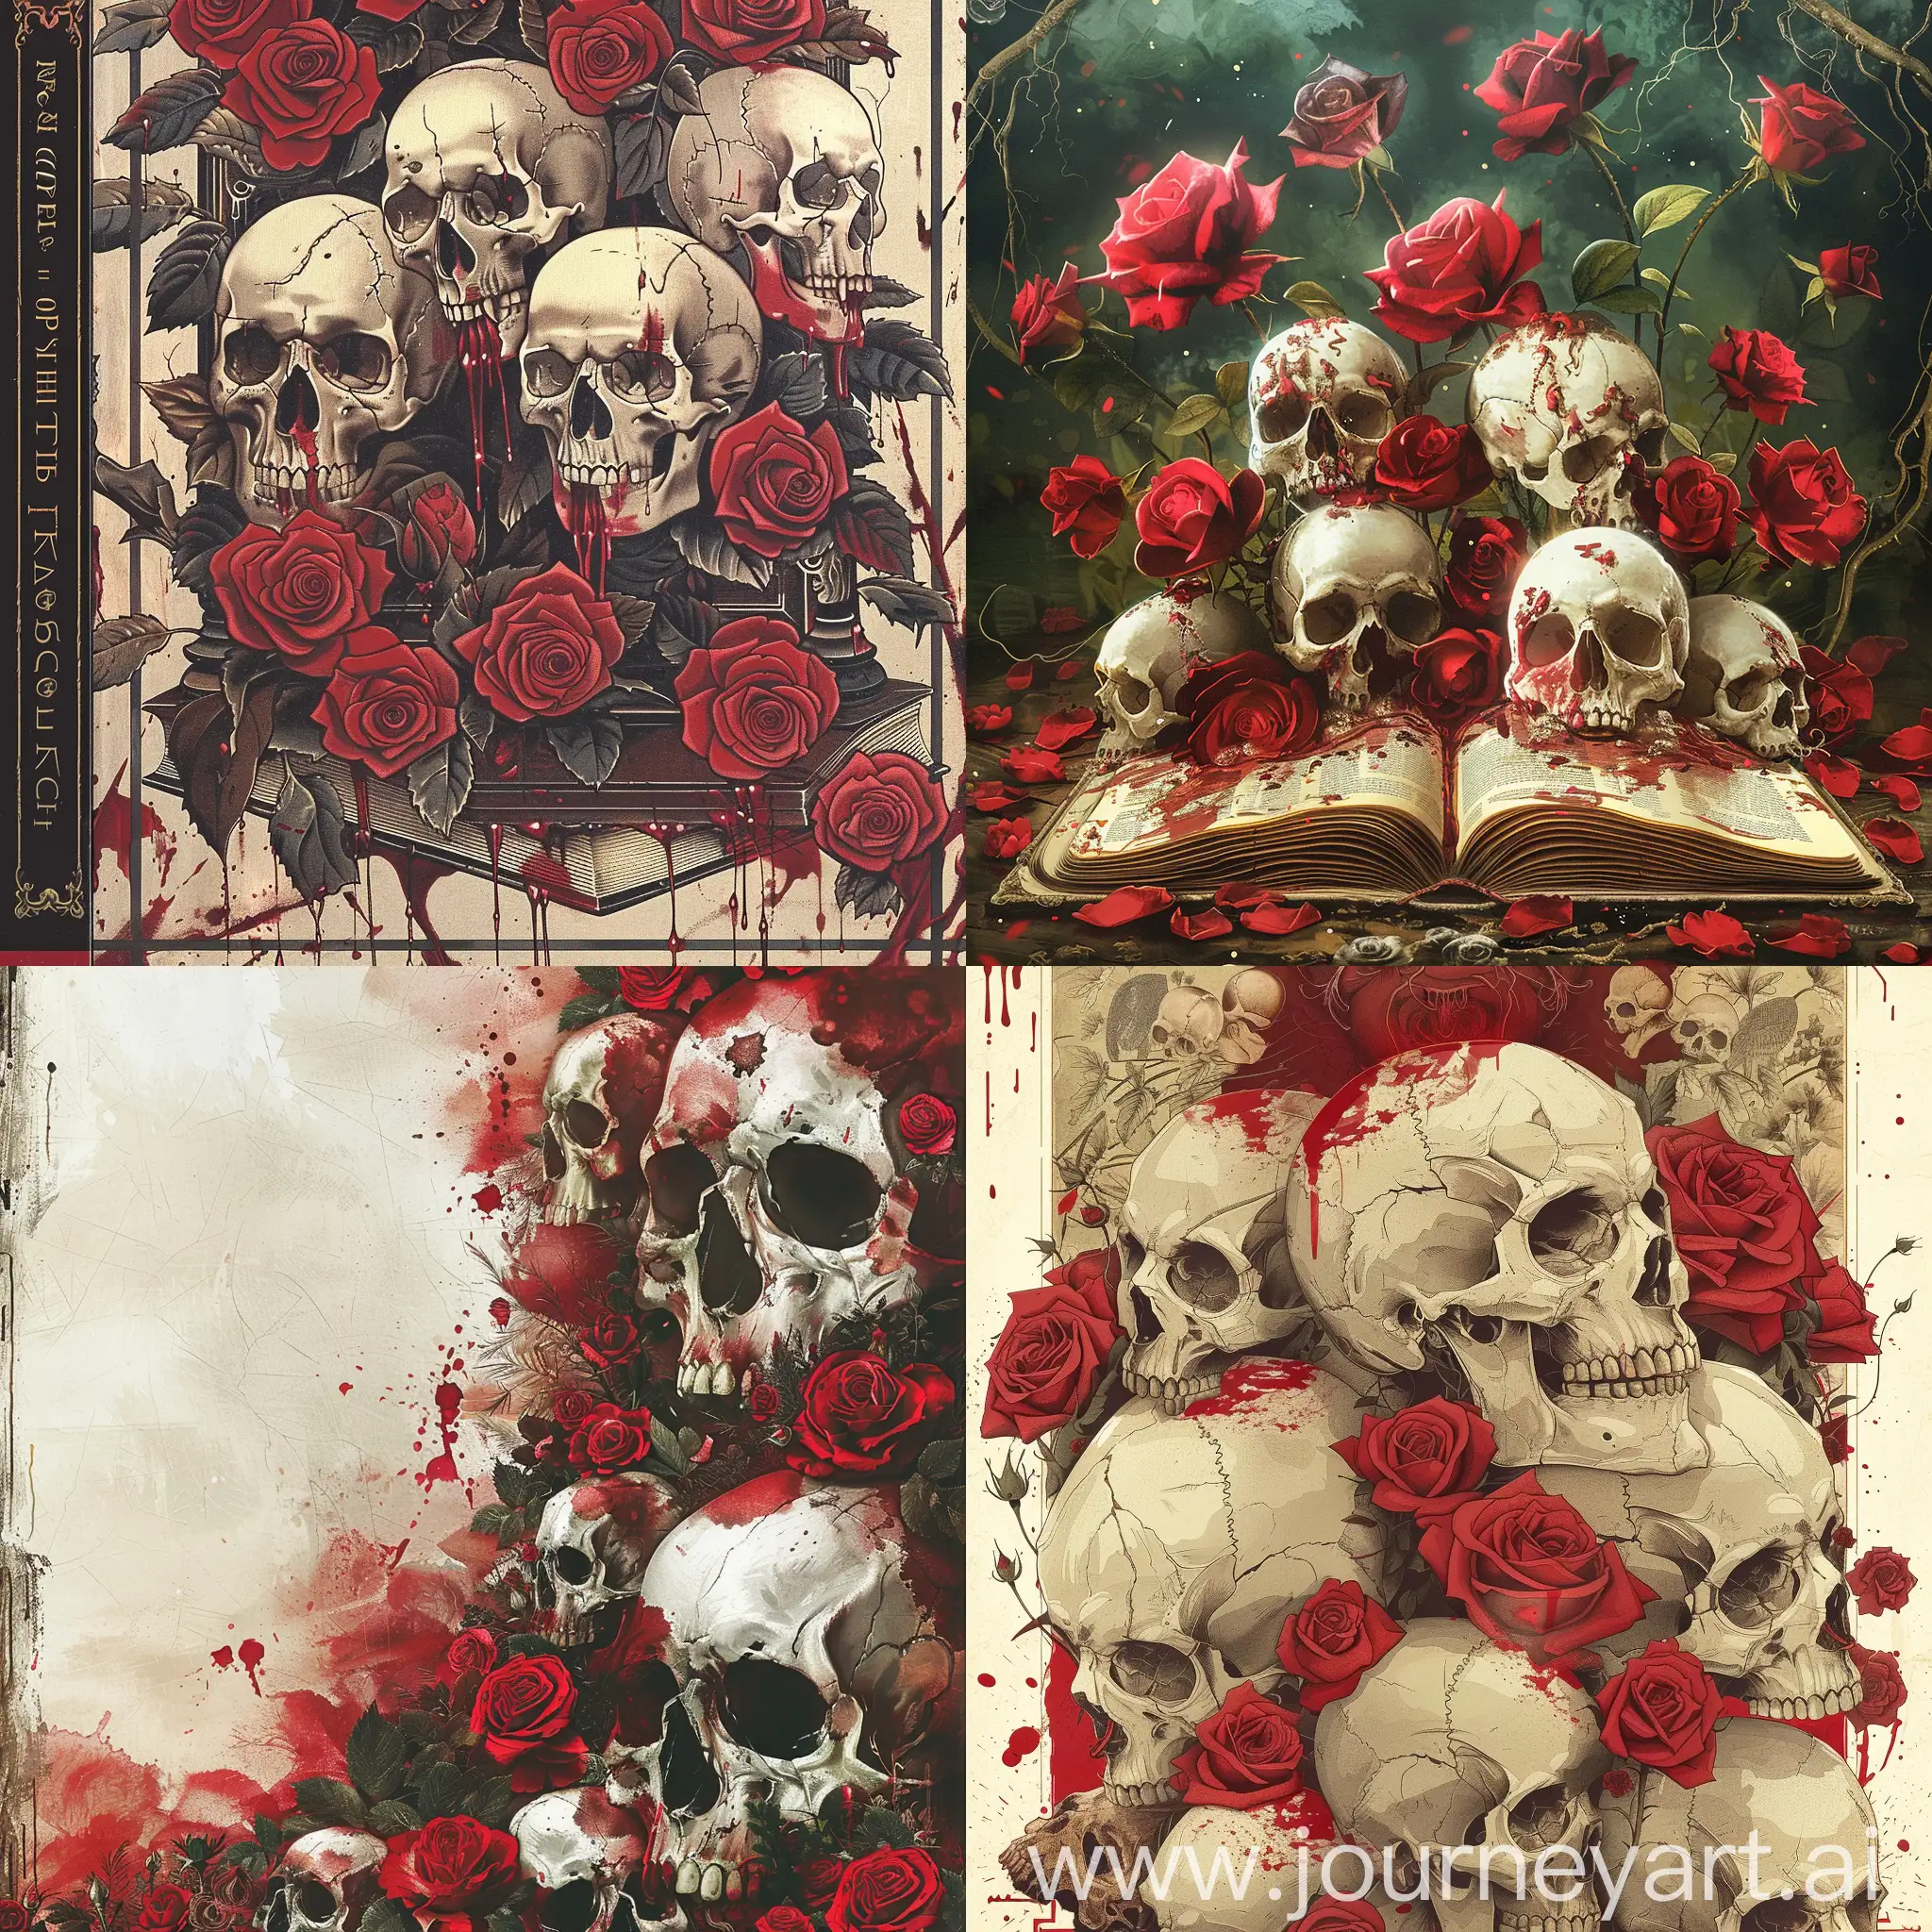 Dark-Fantasy-Book-Cover-with-Skulls-Roses-and-Blood